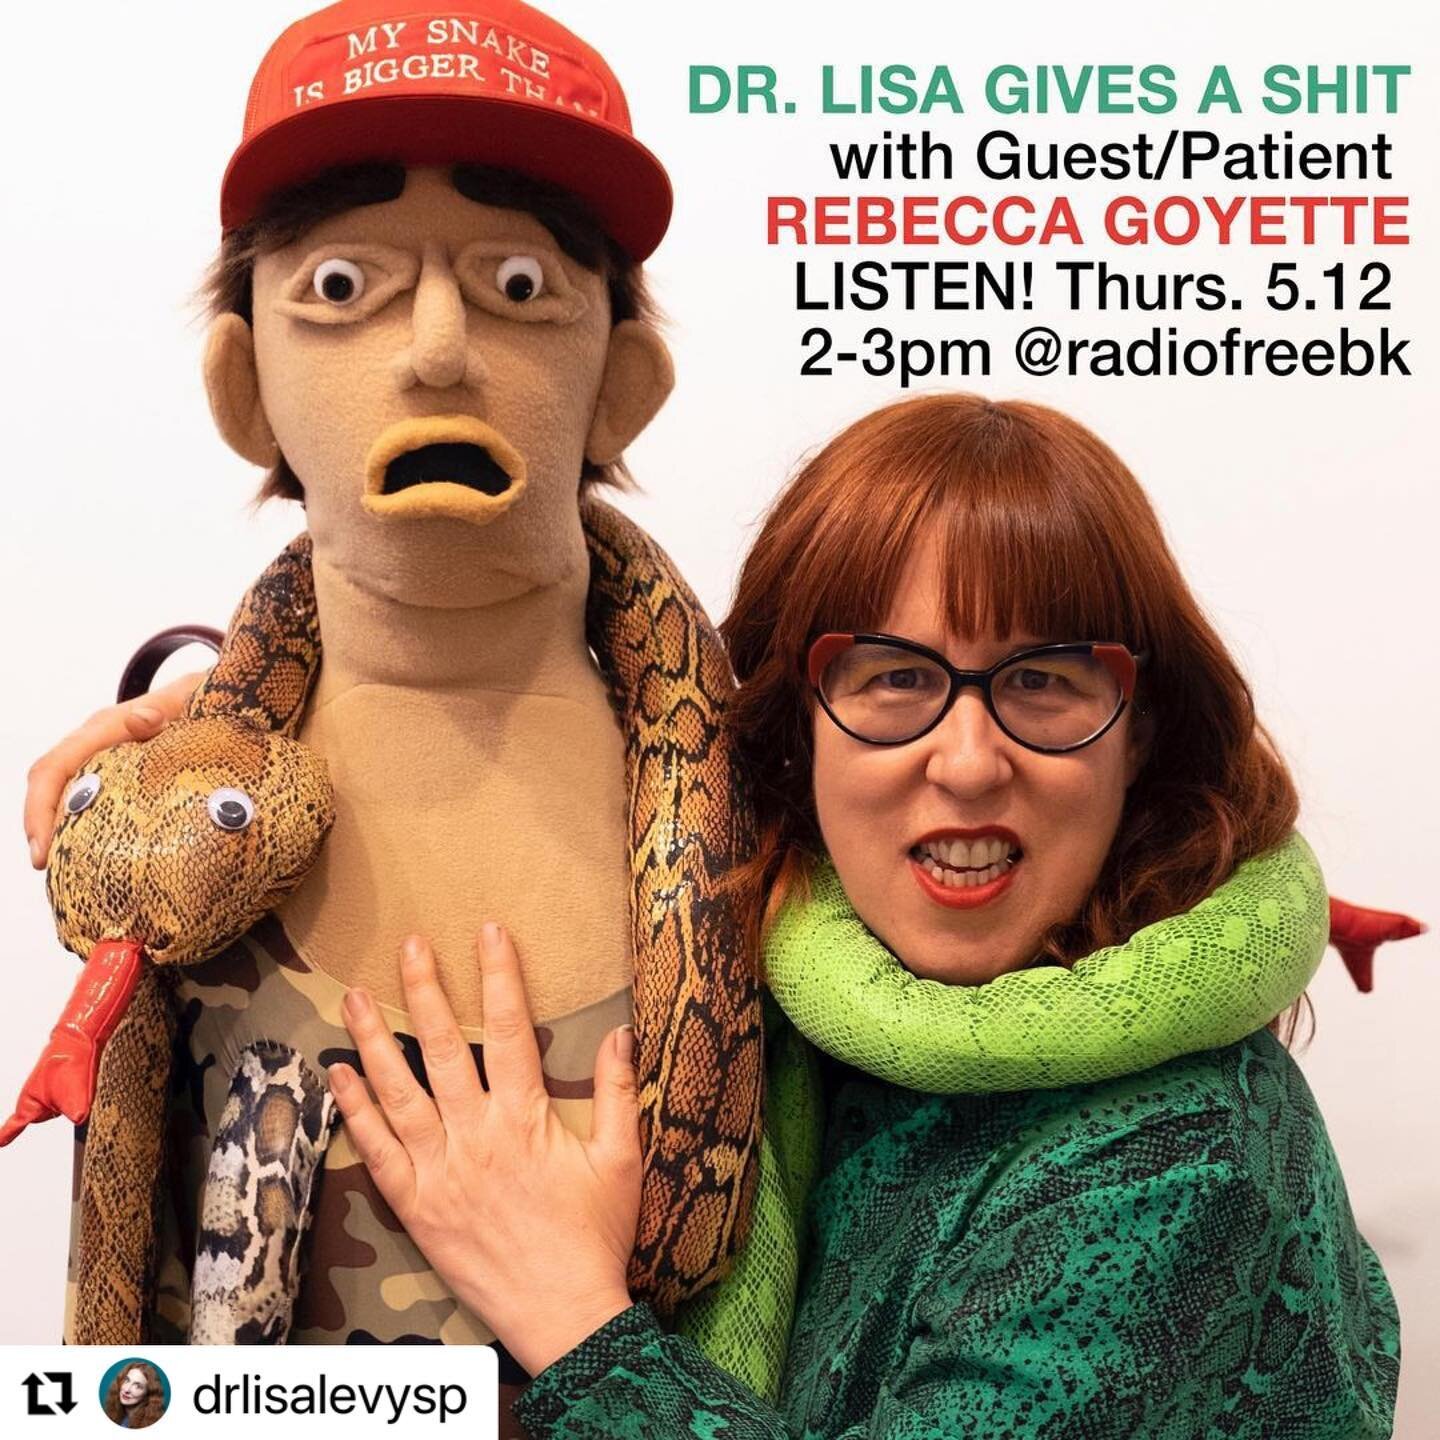 I LOVE chatting with @drlisalevysp
We go IN! 🦞🐍❤️💯 #linkinbio 

・・・
#Artist @rebeccajgoyette on #drlisagivesashit THURSDAY 5.13 2-3pm @radiofreebk She has a #soloexhibition @freightandvolumegallery up until May 16 Check it out!!! #artistsoninstagr